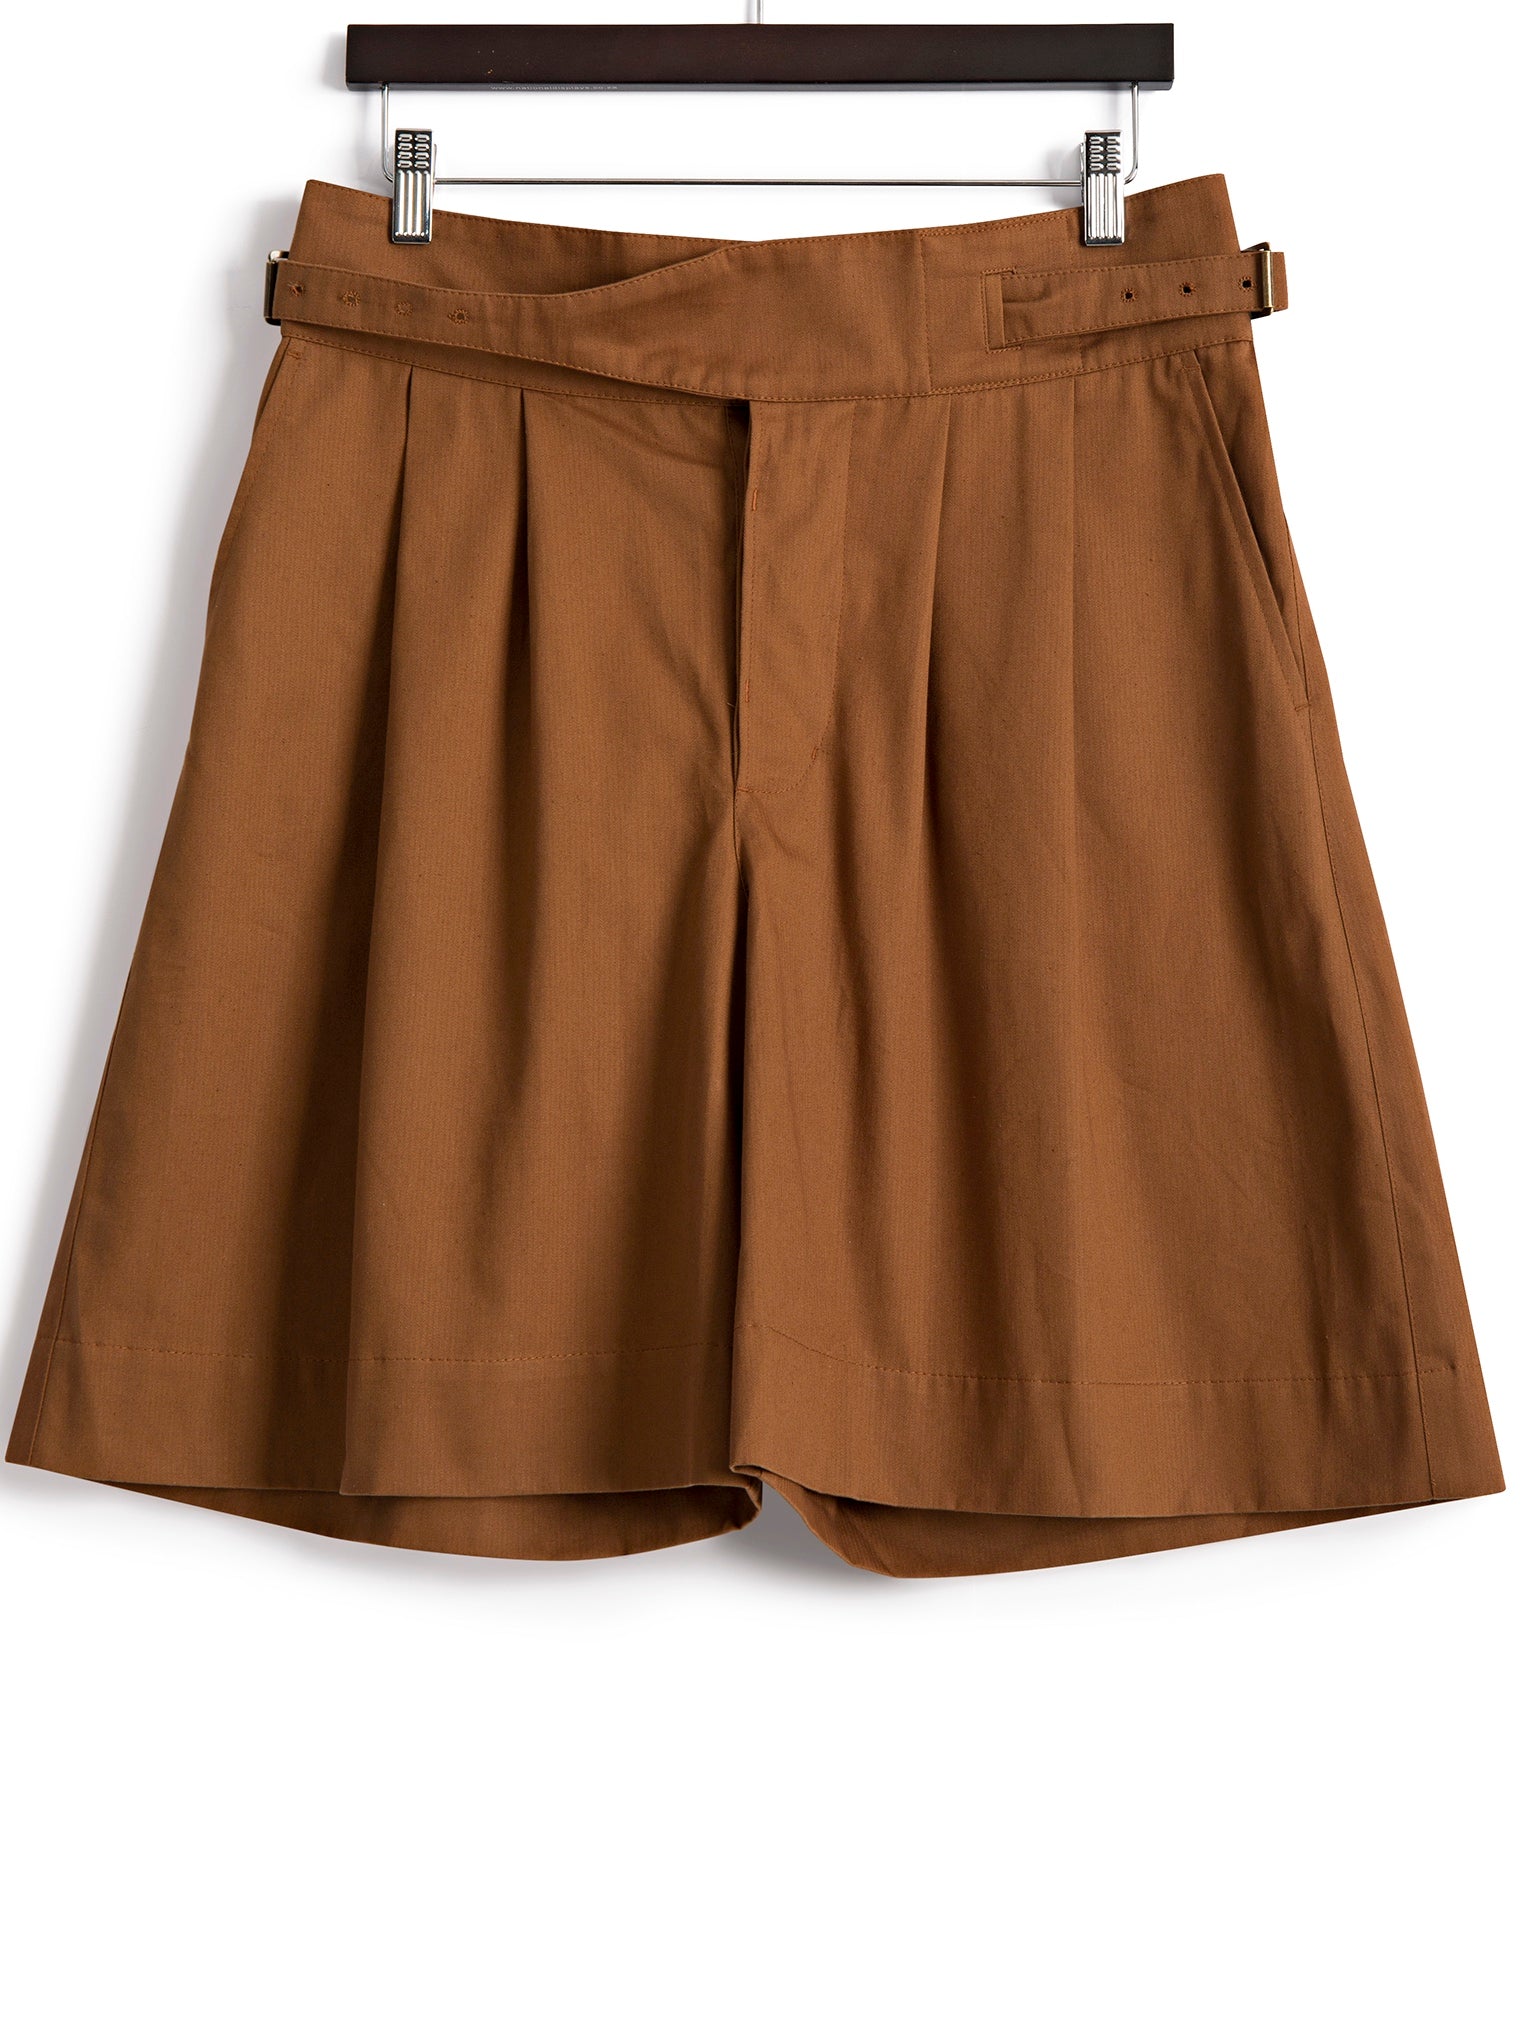 Crossband Shorts in Antelope, Shorts, Hickman & Bousfied - Hickman & Bousfield, Safari and Travel Clothing